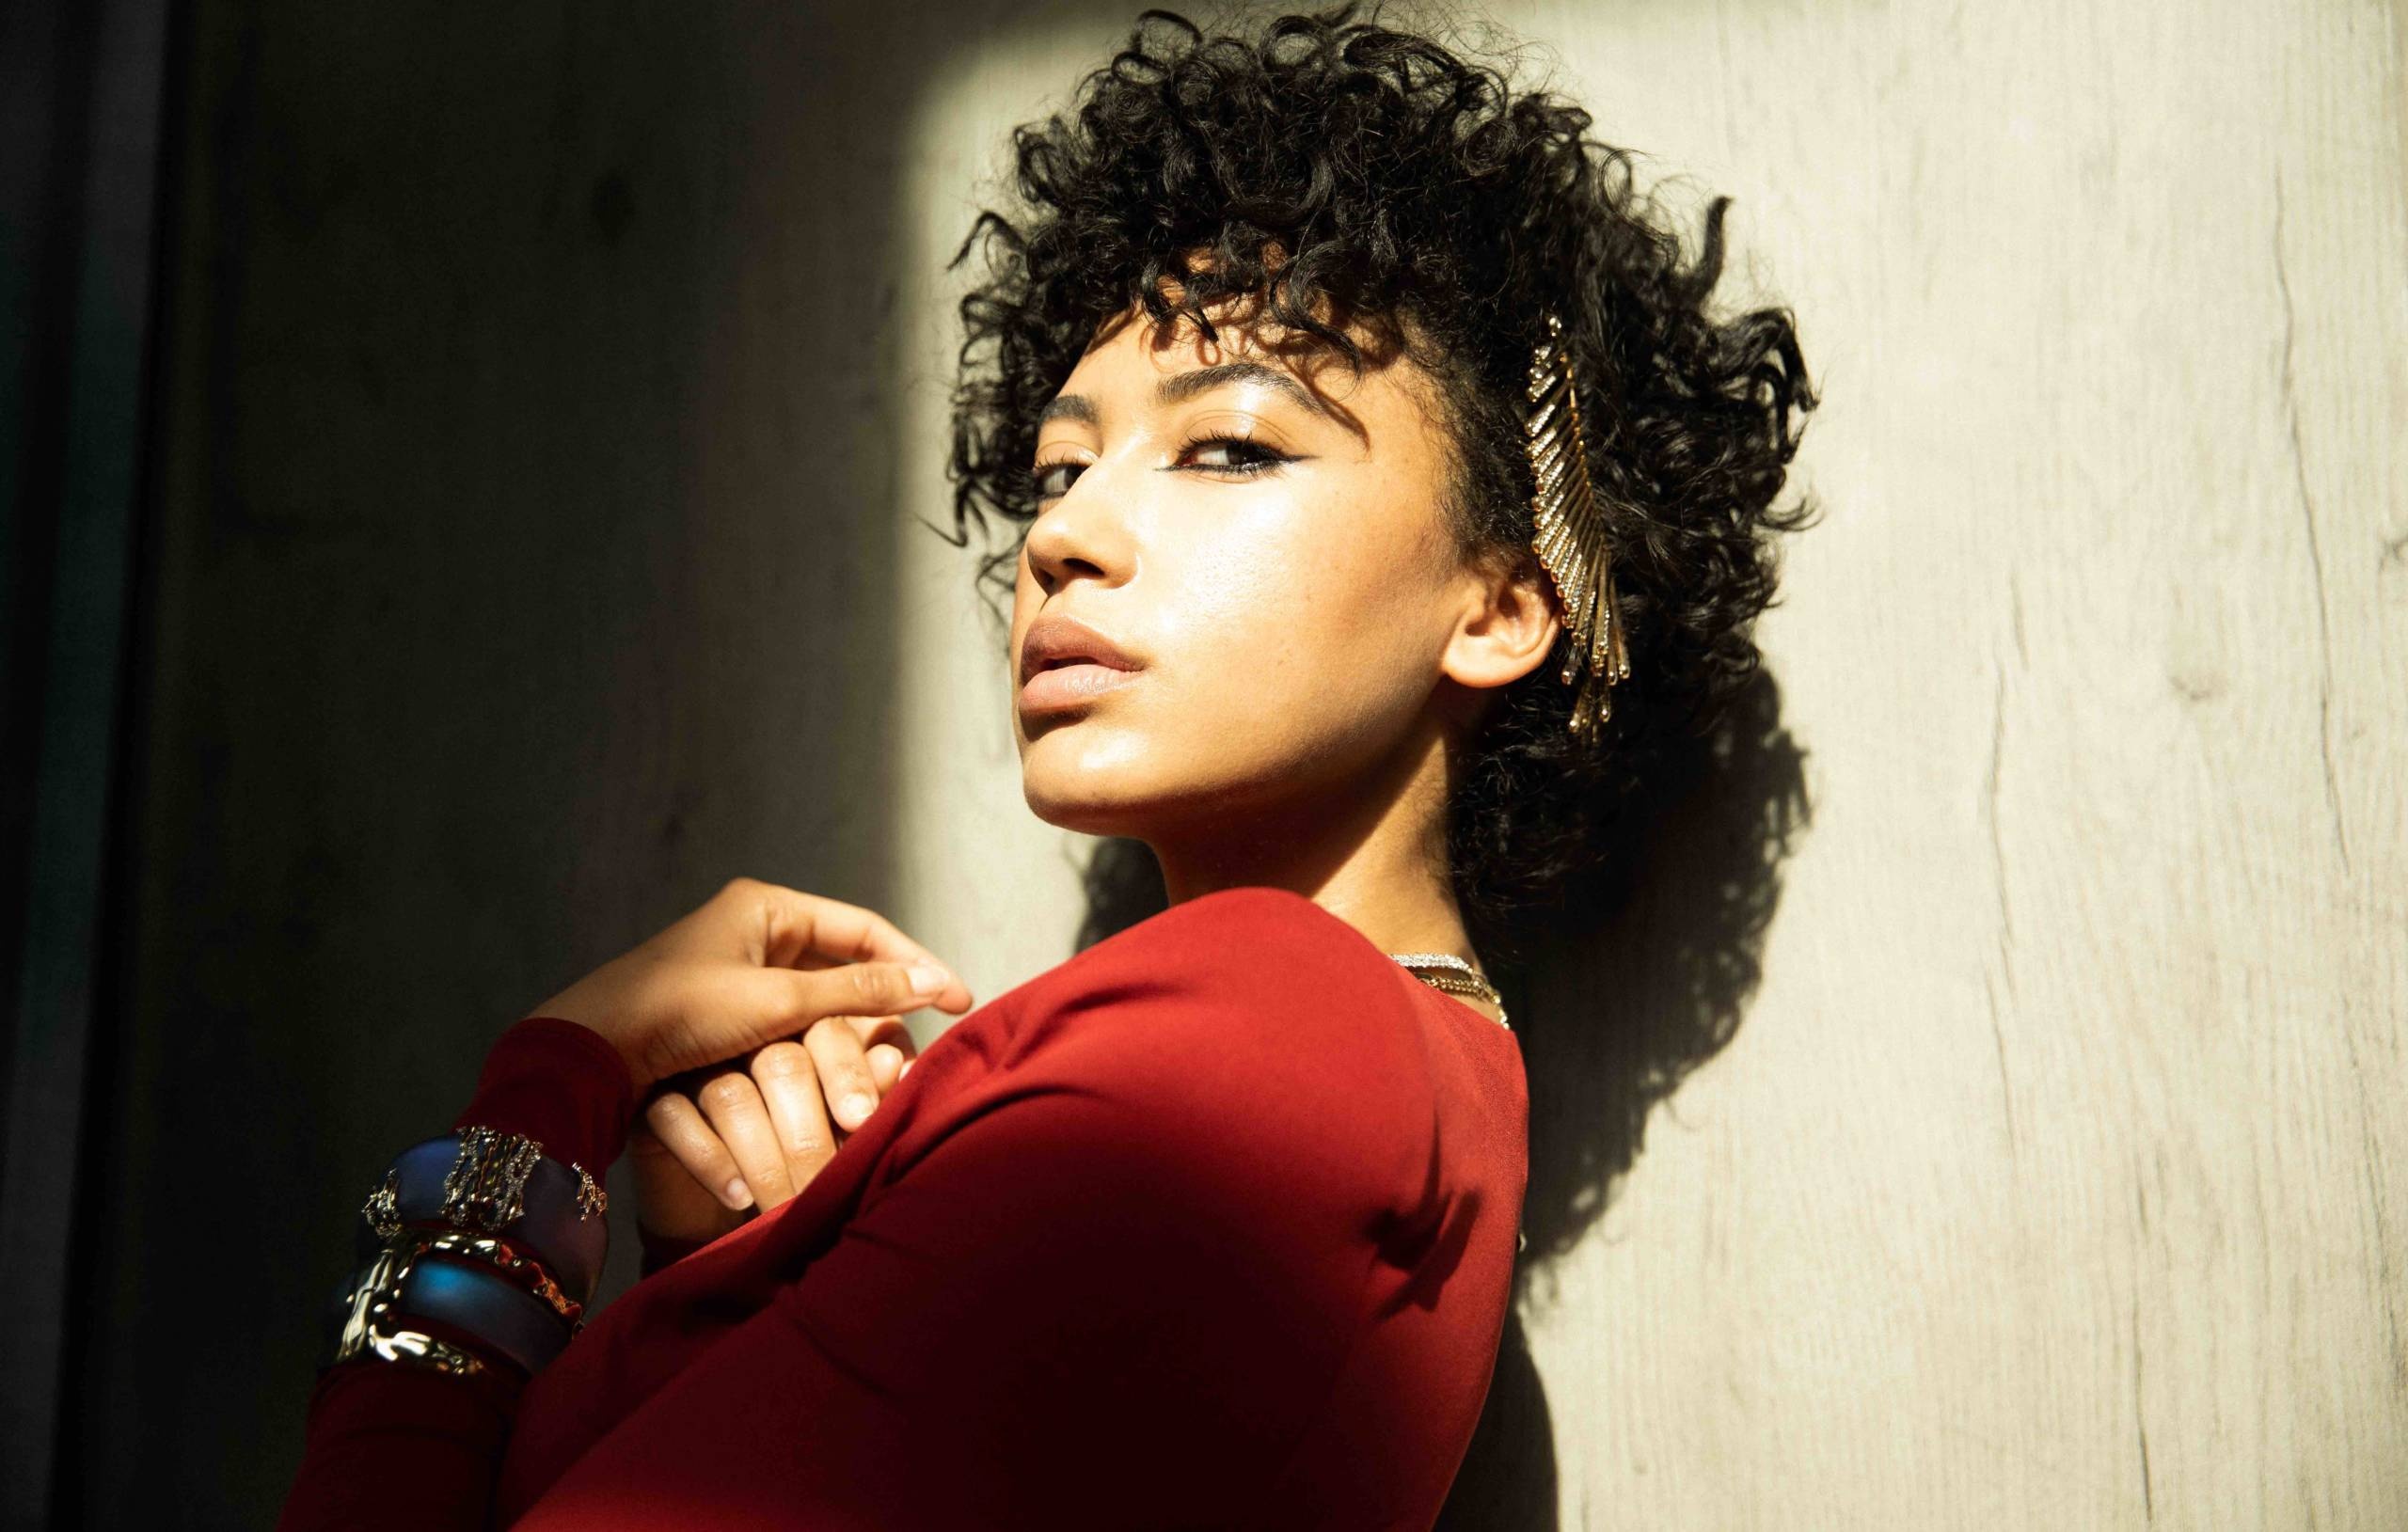 Andy Allo, Interview, Life after death, Memorable moment, 2560x1630 HD Desktop